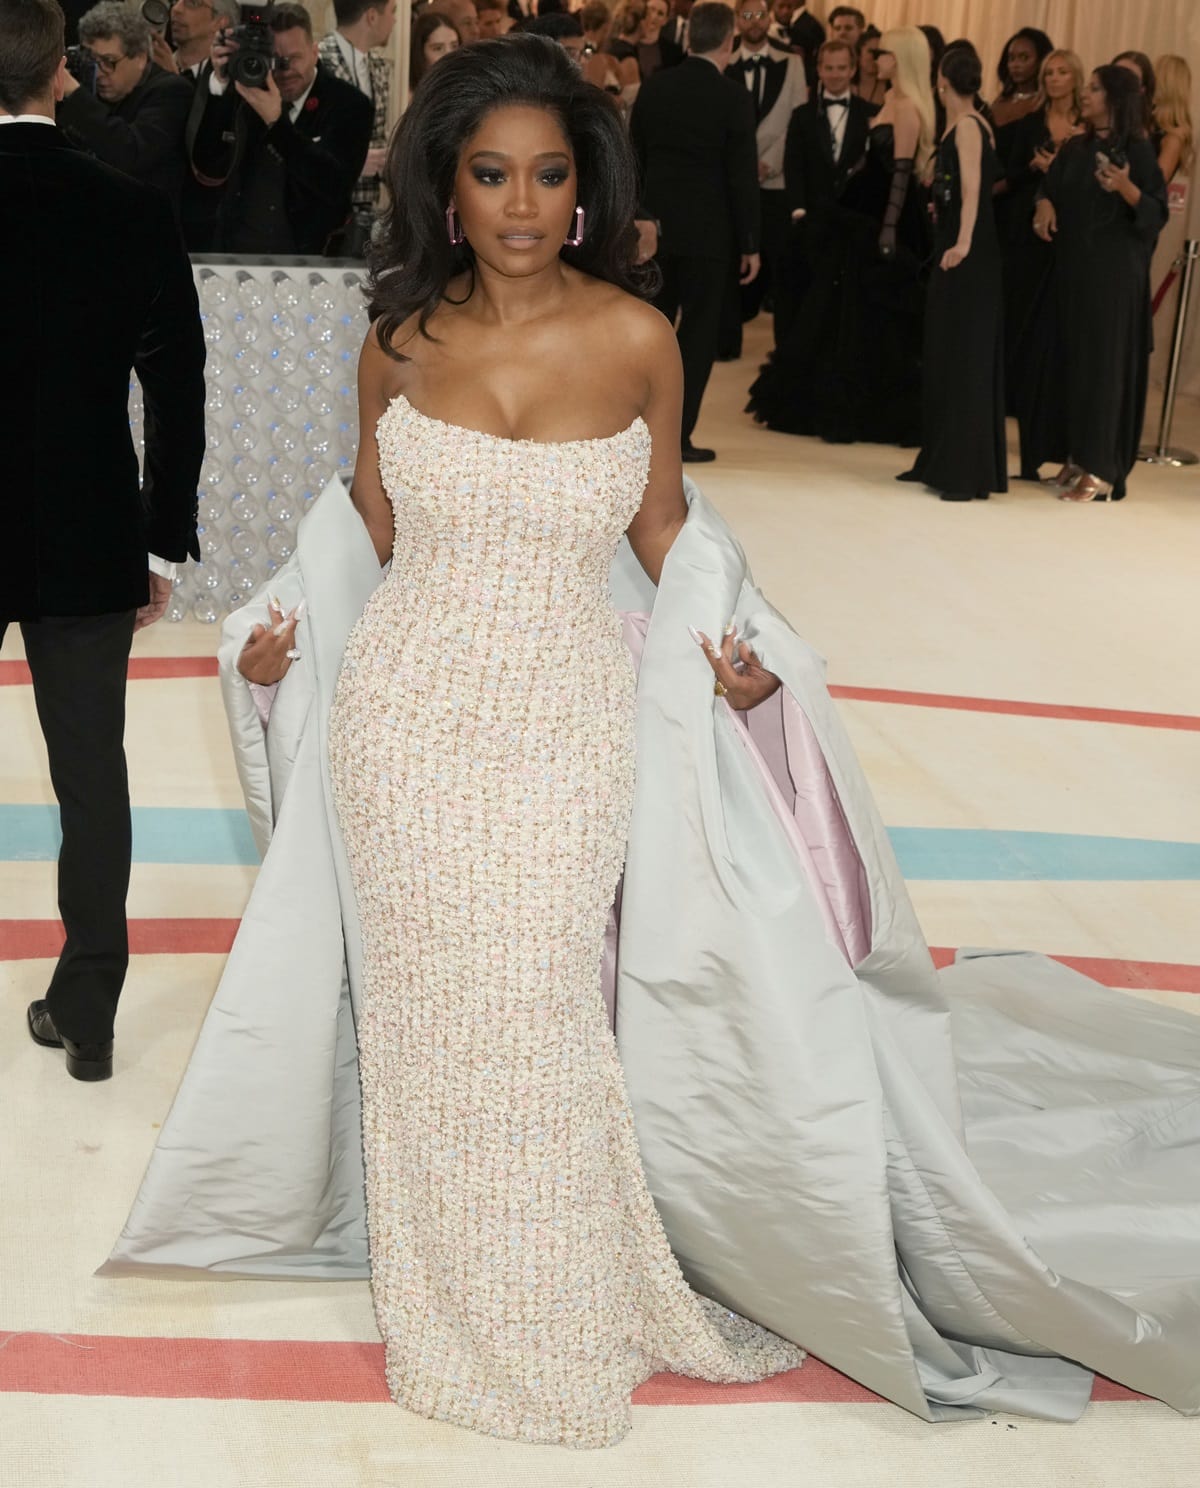 Keke Palmer exuded glamour in a strapless pastel tweed gown designed by Sergio Hudson adorned with over 12,000 Swarovski crystals and pearls at the 2023 Met Gala